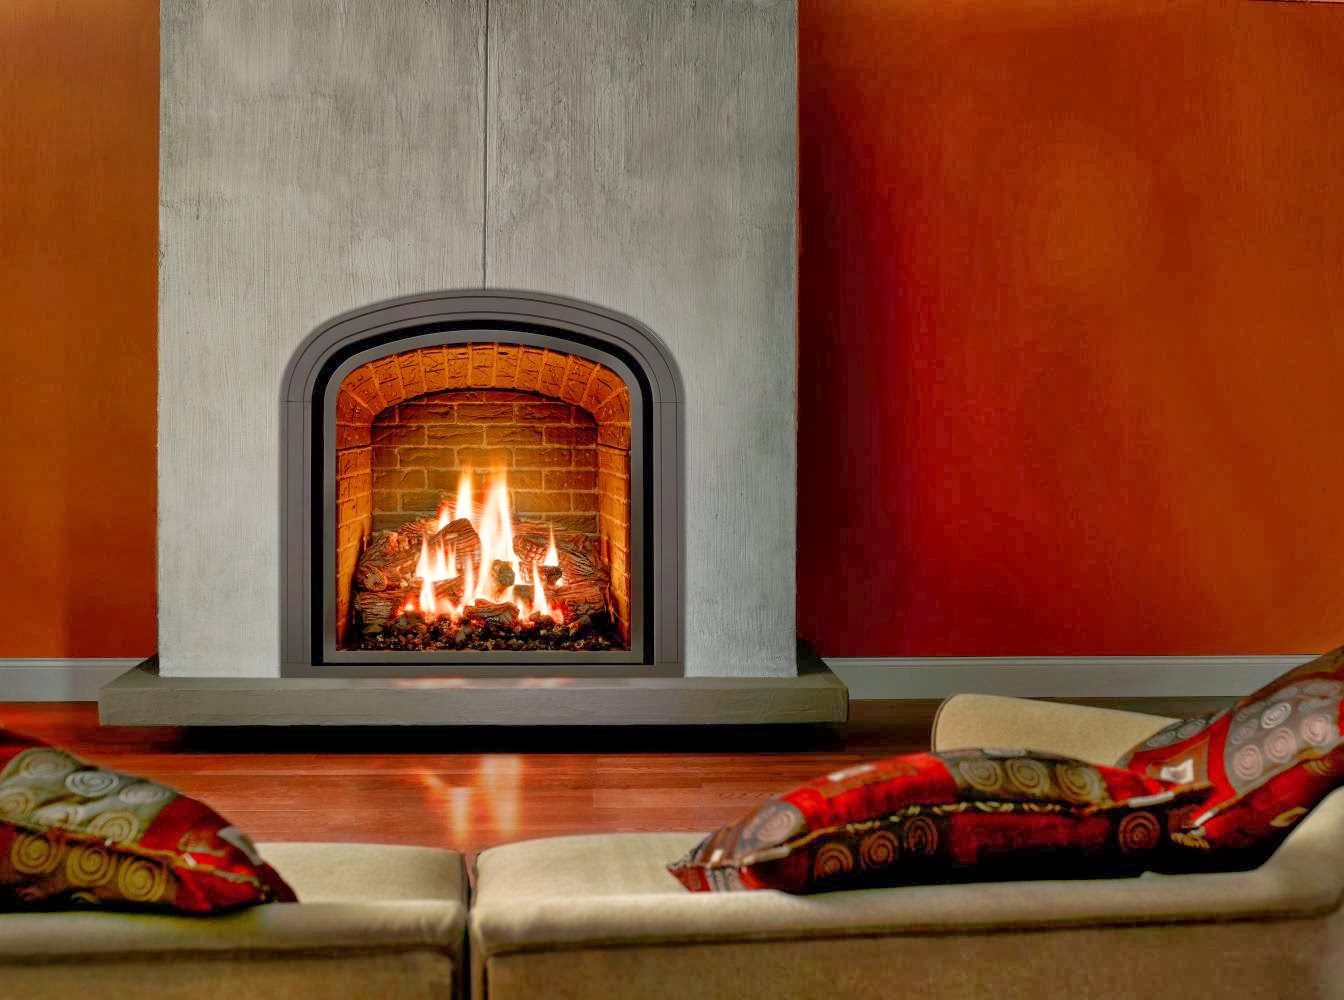 http://mendotahearth.com/fireplace-photo-gallery.php